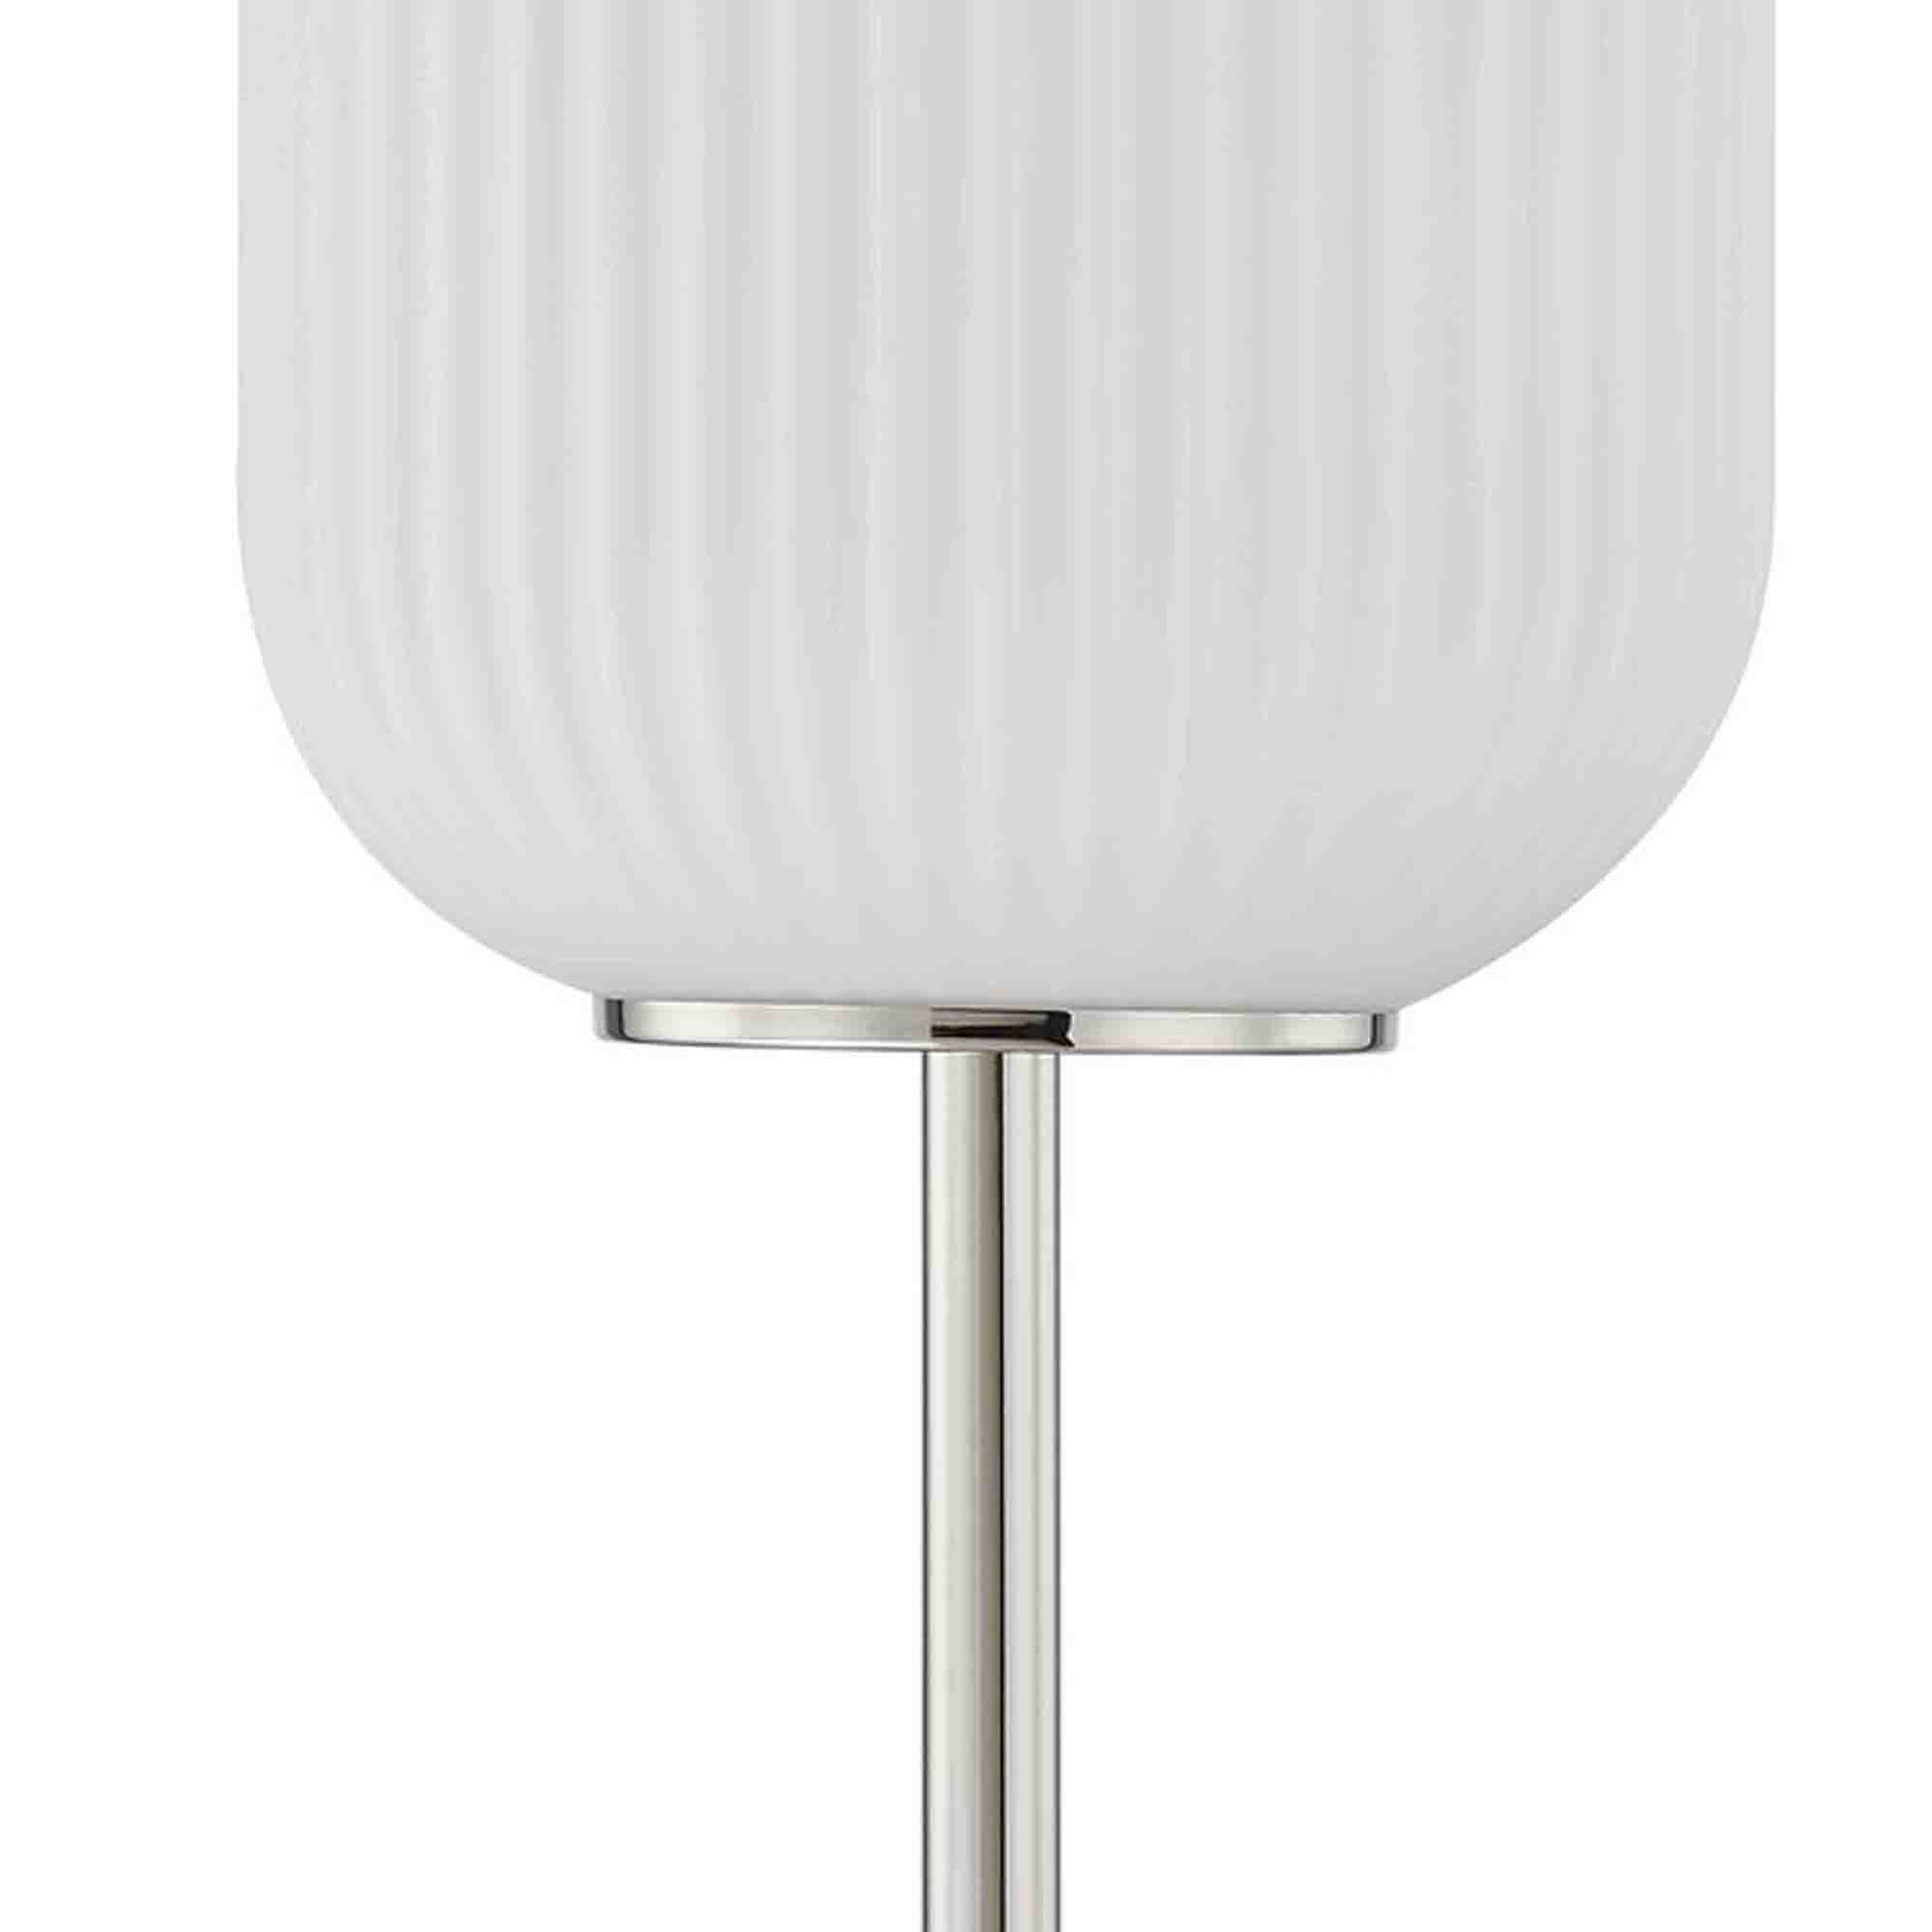 Aimy 27 Inch Table Lamp, LED Glass Shade, Metal, Chrome And White Finish -Saltoro Sherpi